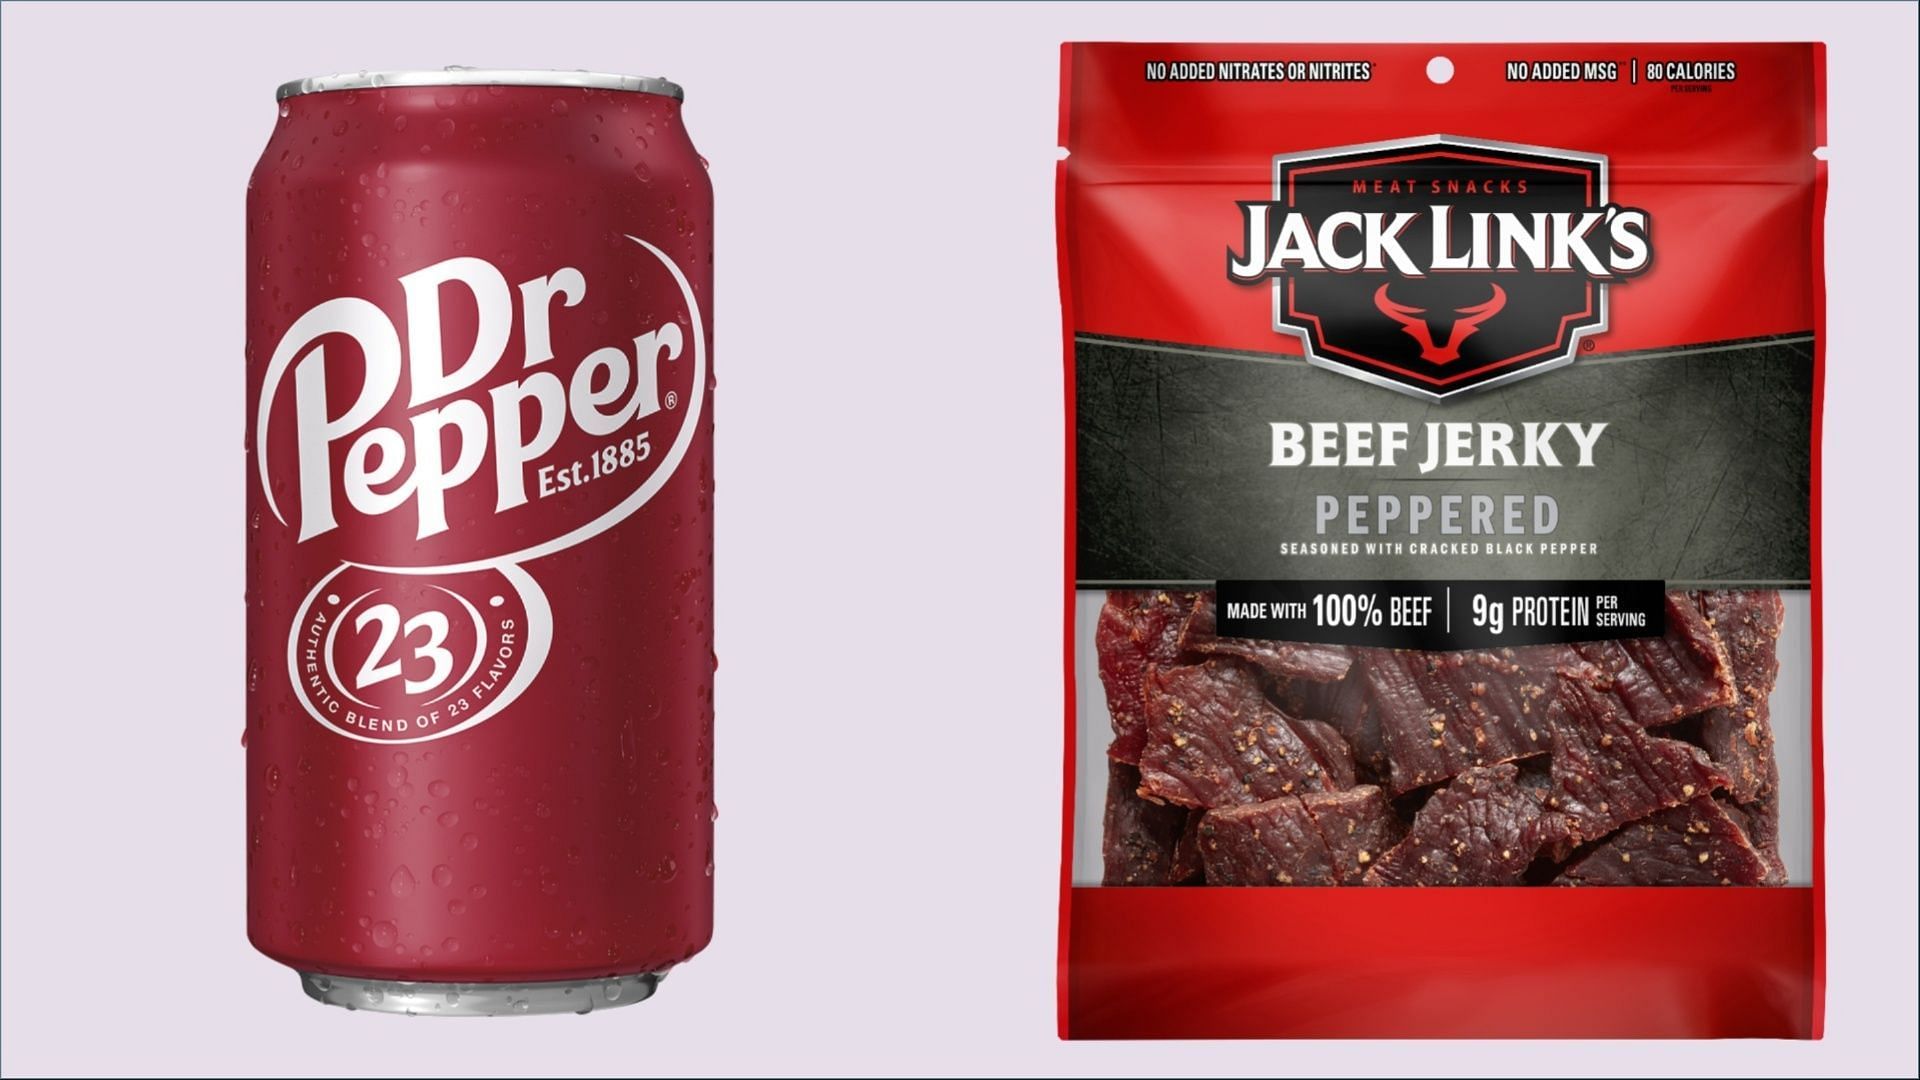 The Meat Sticks and Beef Jerky may be Jack Link&#039;s limited-time snacks (Image via Jack Link&#039;s / Dr Pepper)